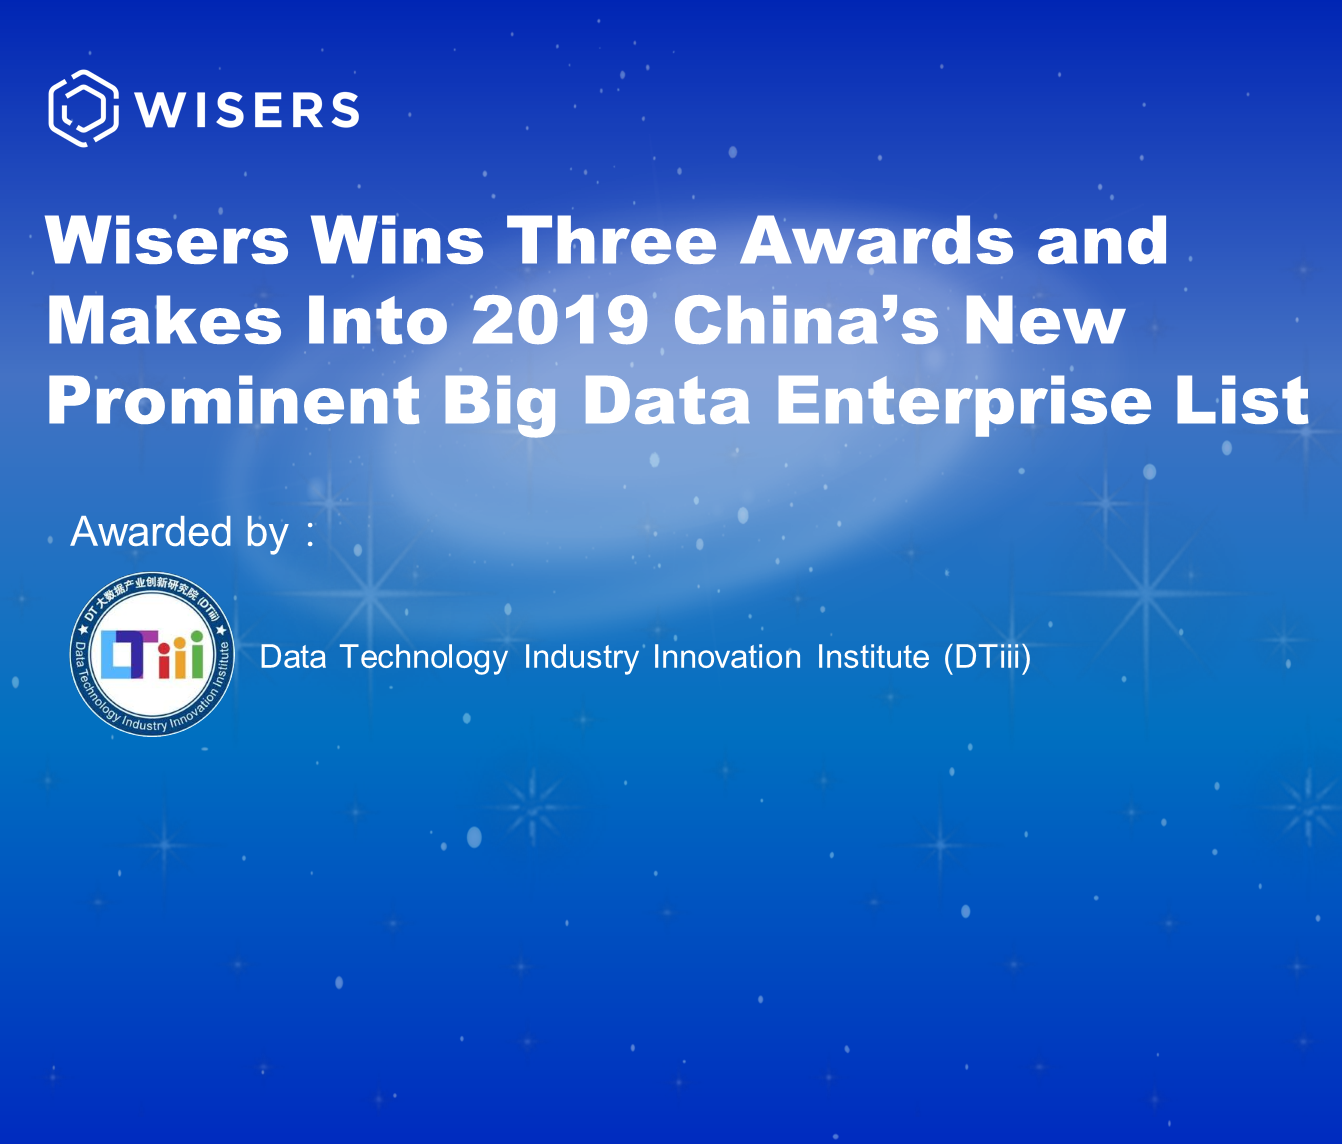 Wisers Wins Three Awards and Makes Into 2019 China's New Prominent Big Data Enterprise List